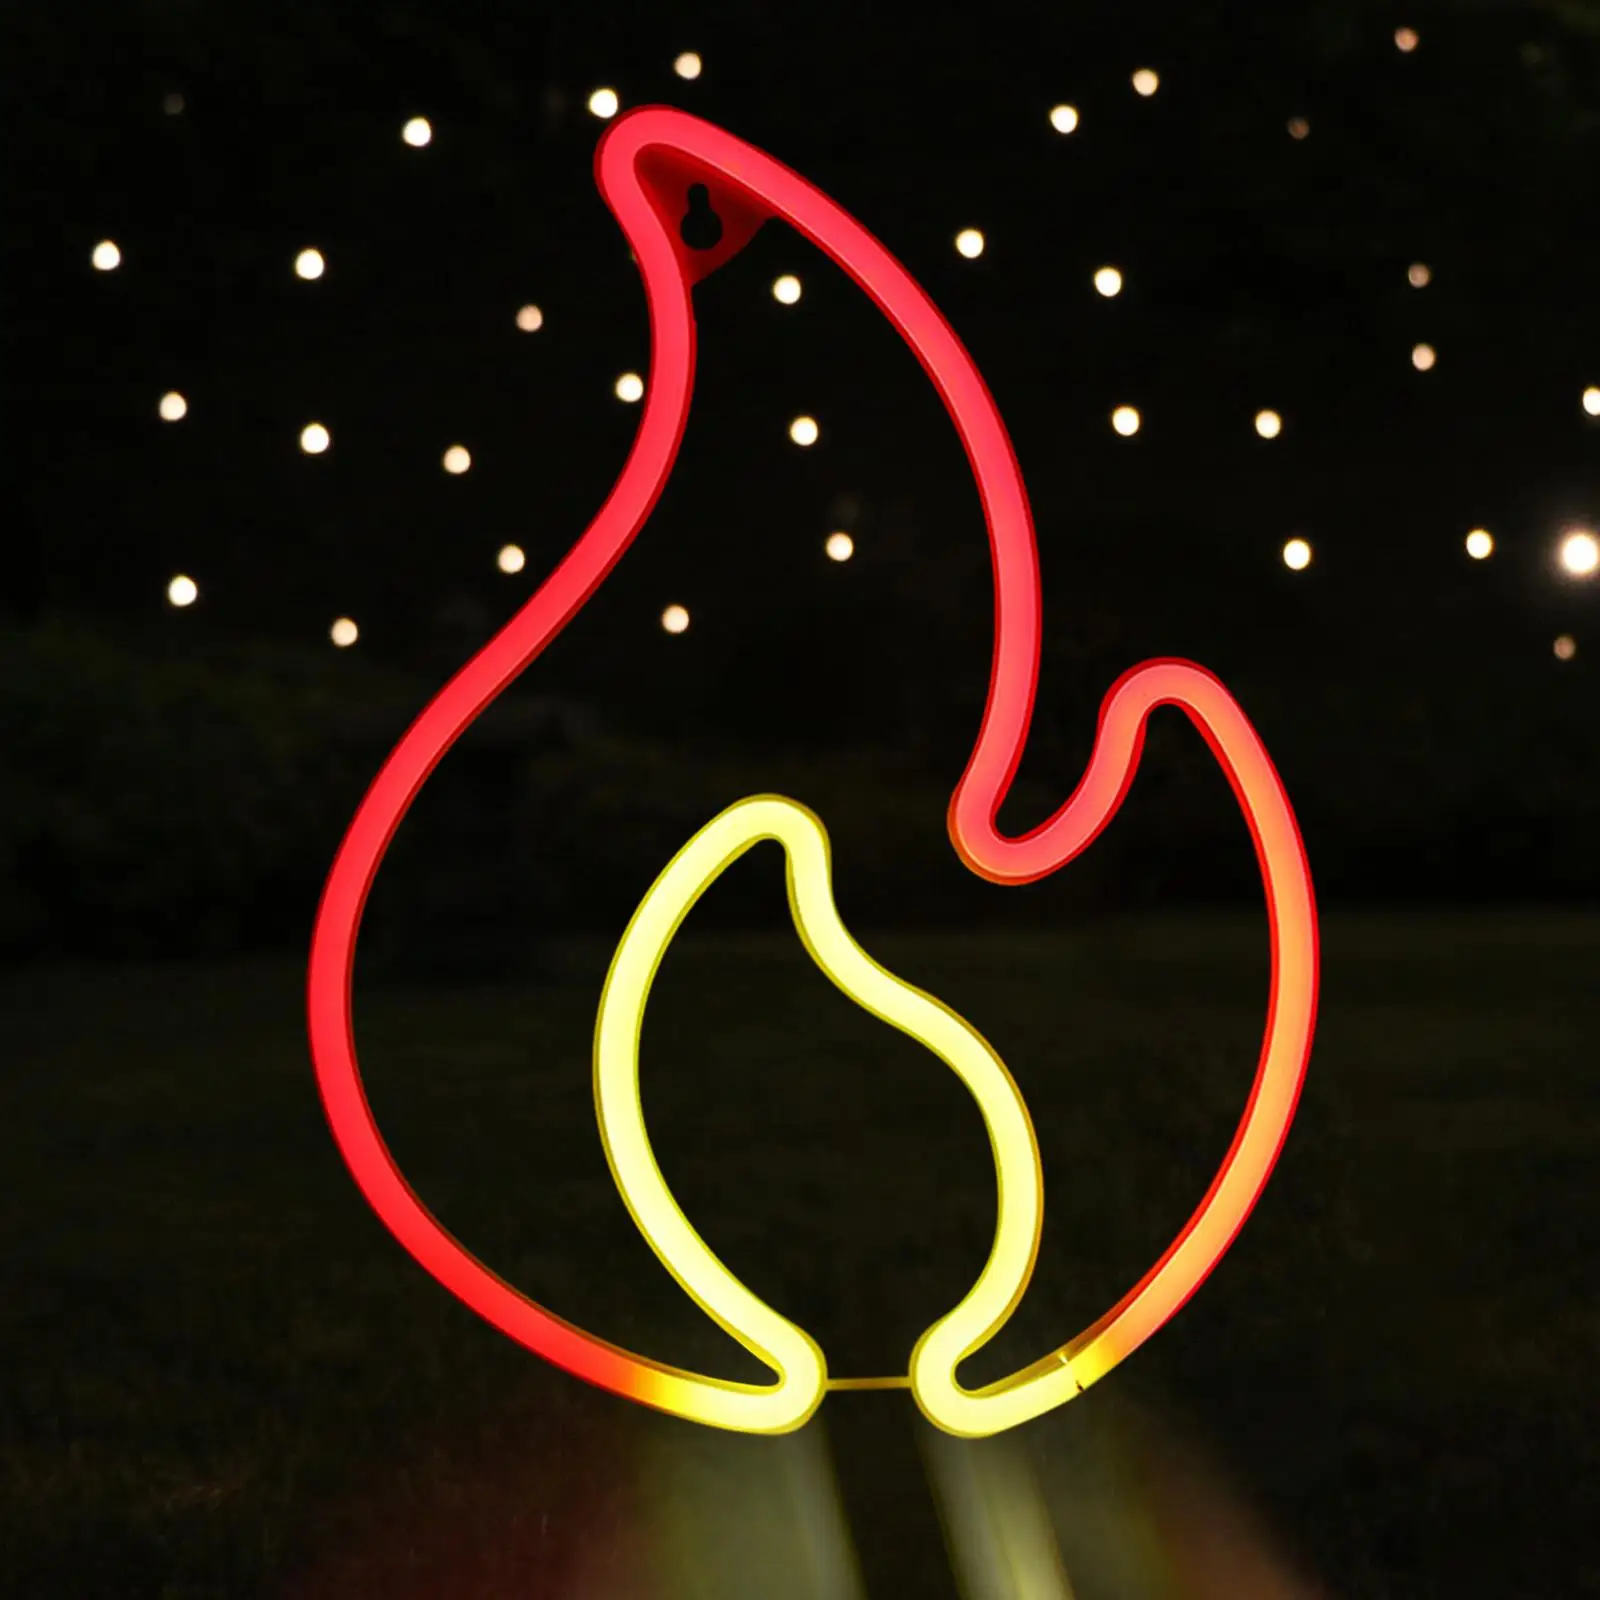 Flame Neon Sign Decor Decorative Neon Light Sign Night Lights Neon Lights for Birthday Party Bar Kids Living Room Home